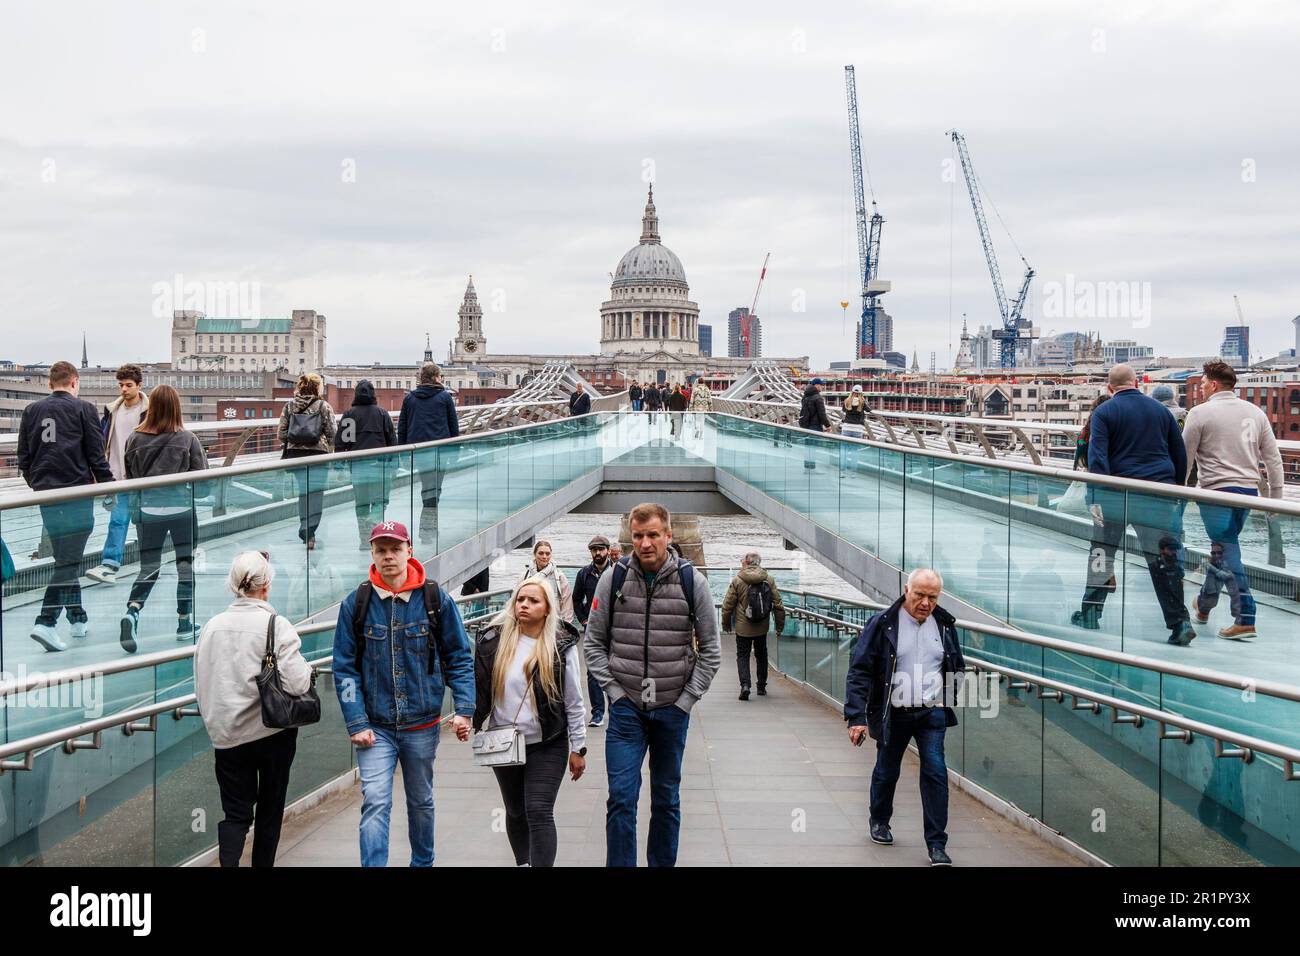 Pedestrians on the Millennium Bridge, St Paul's Cathedral in the background, London, UK Stock Photo